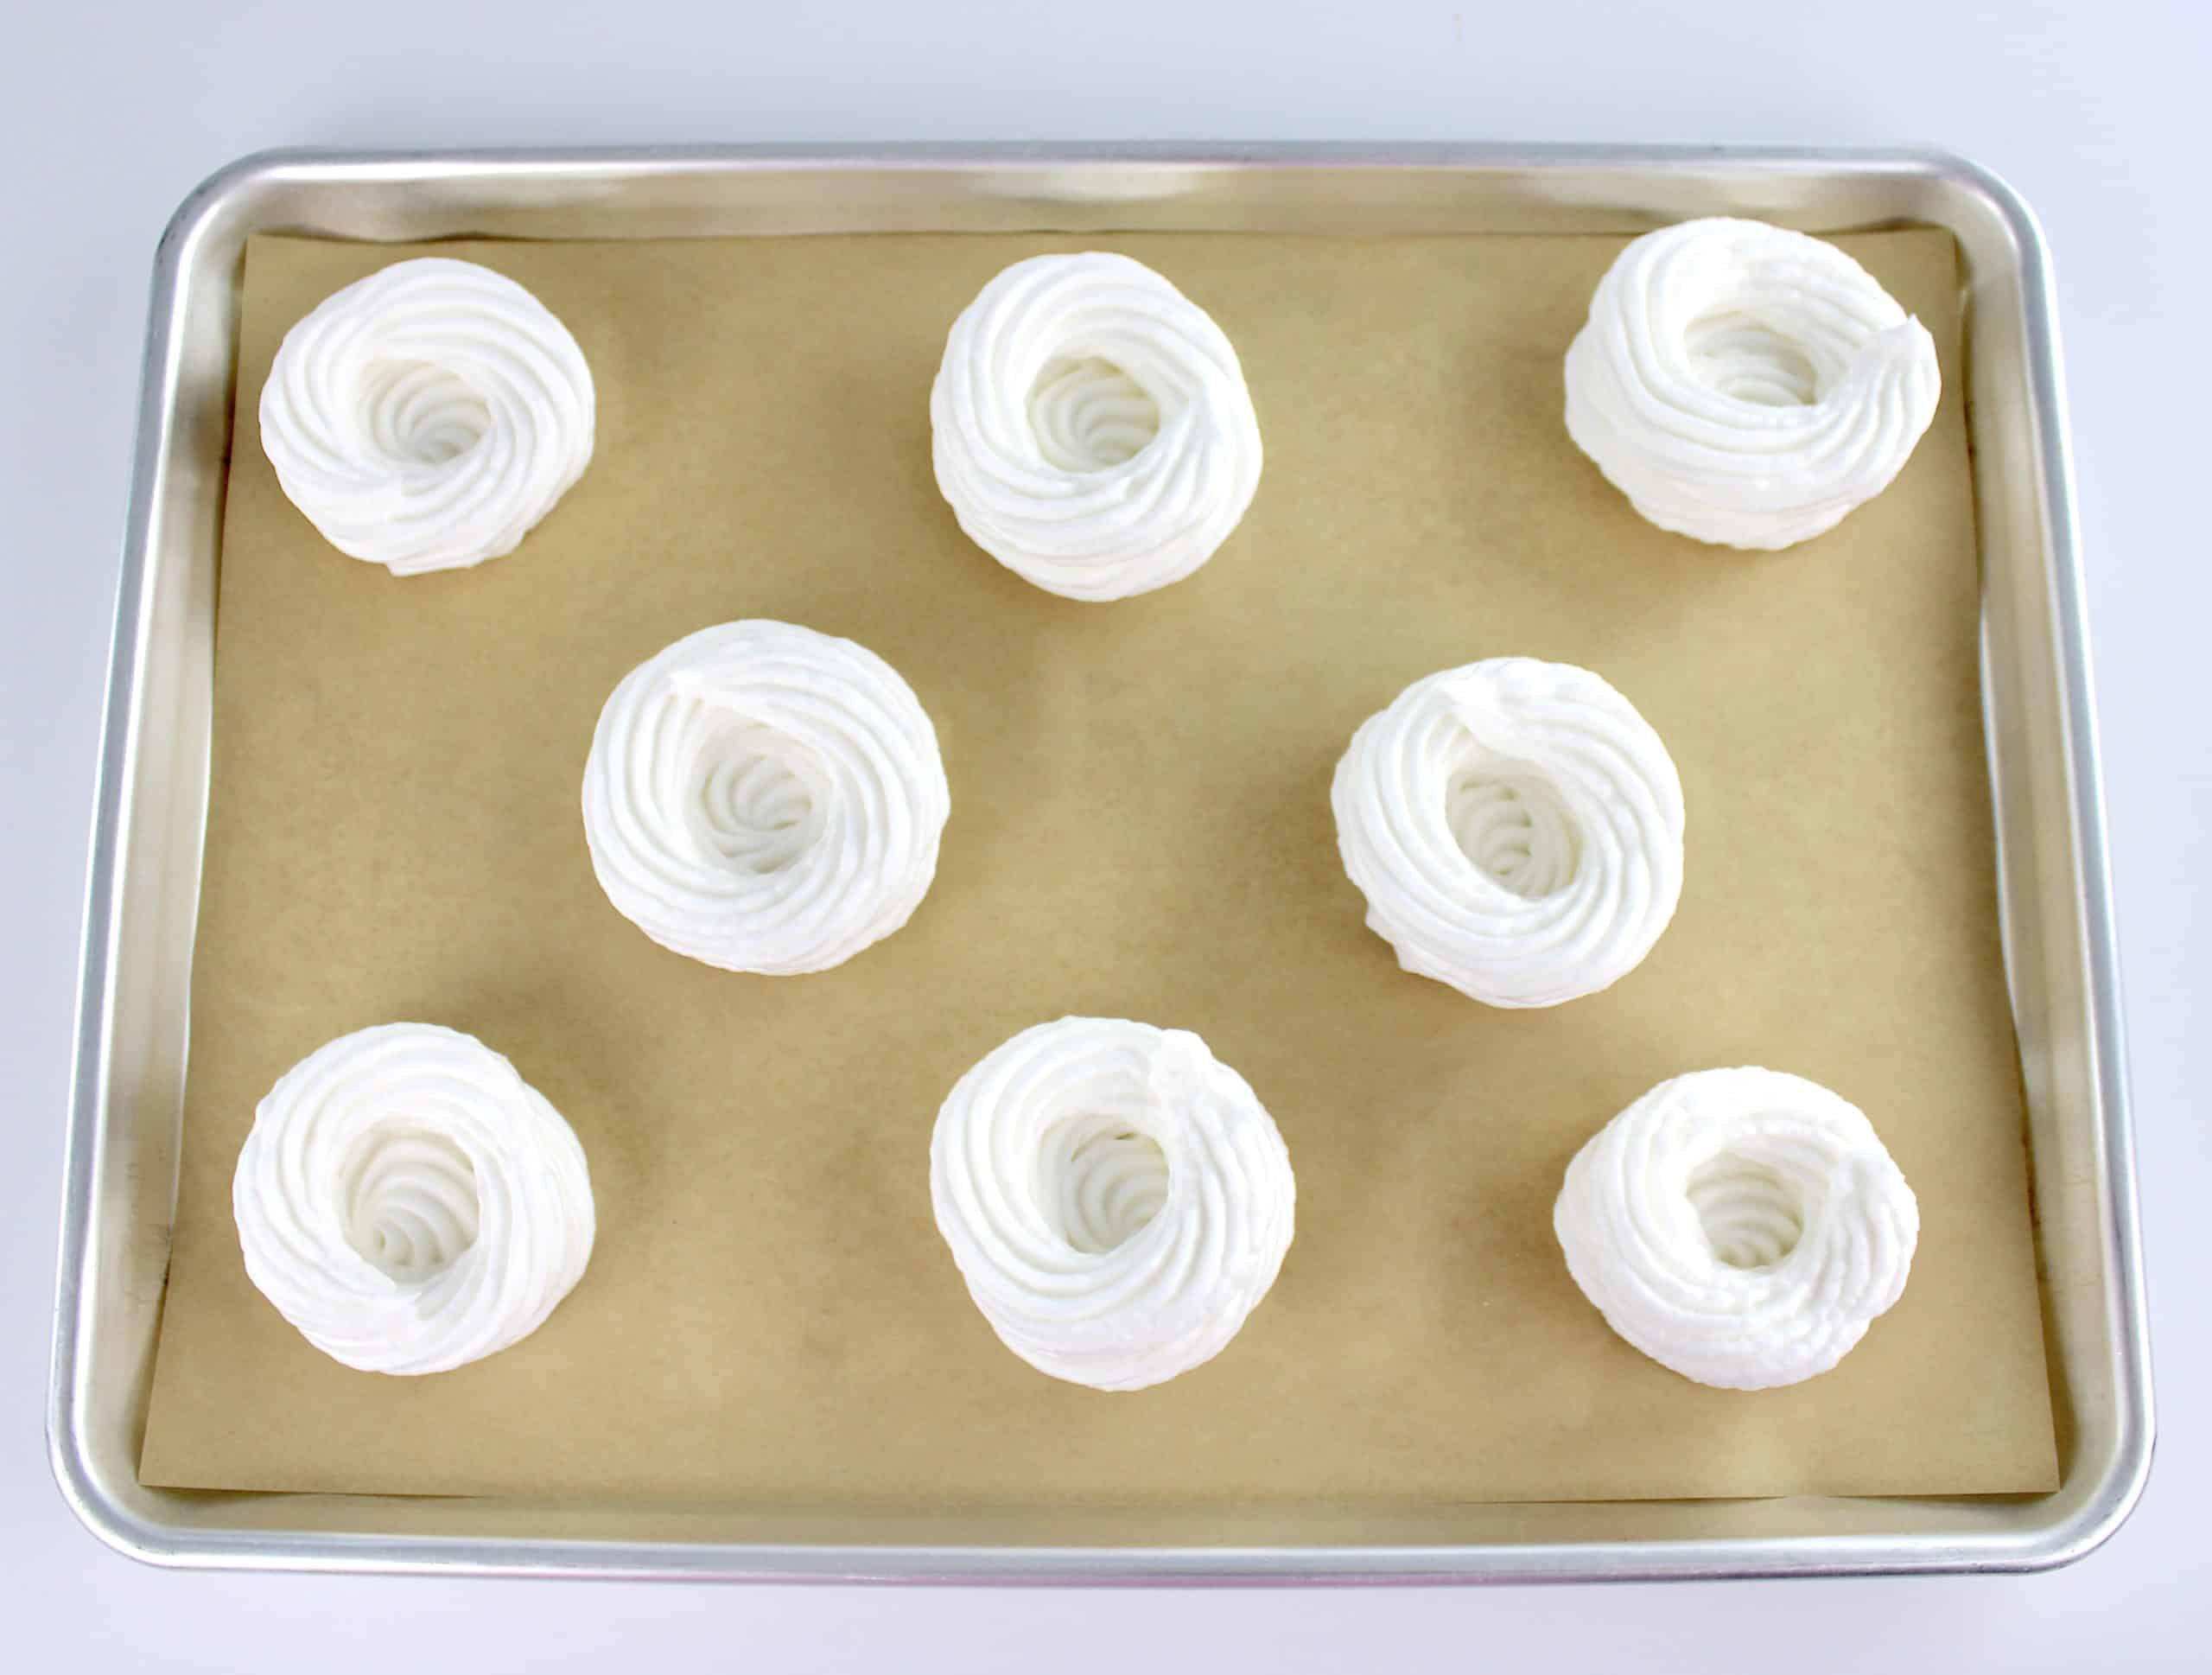 8 mini pavlovas unbaked on sheet pan lined with parchment paper